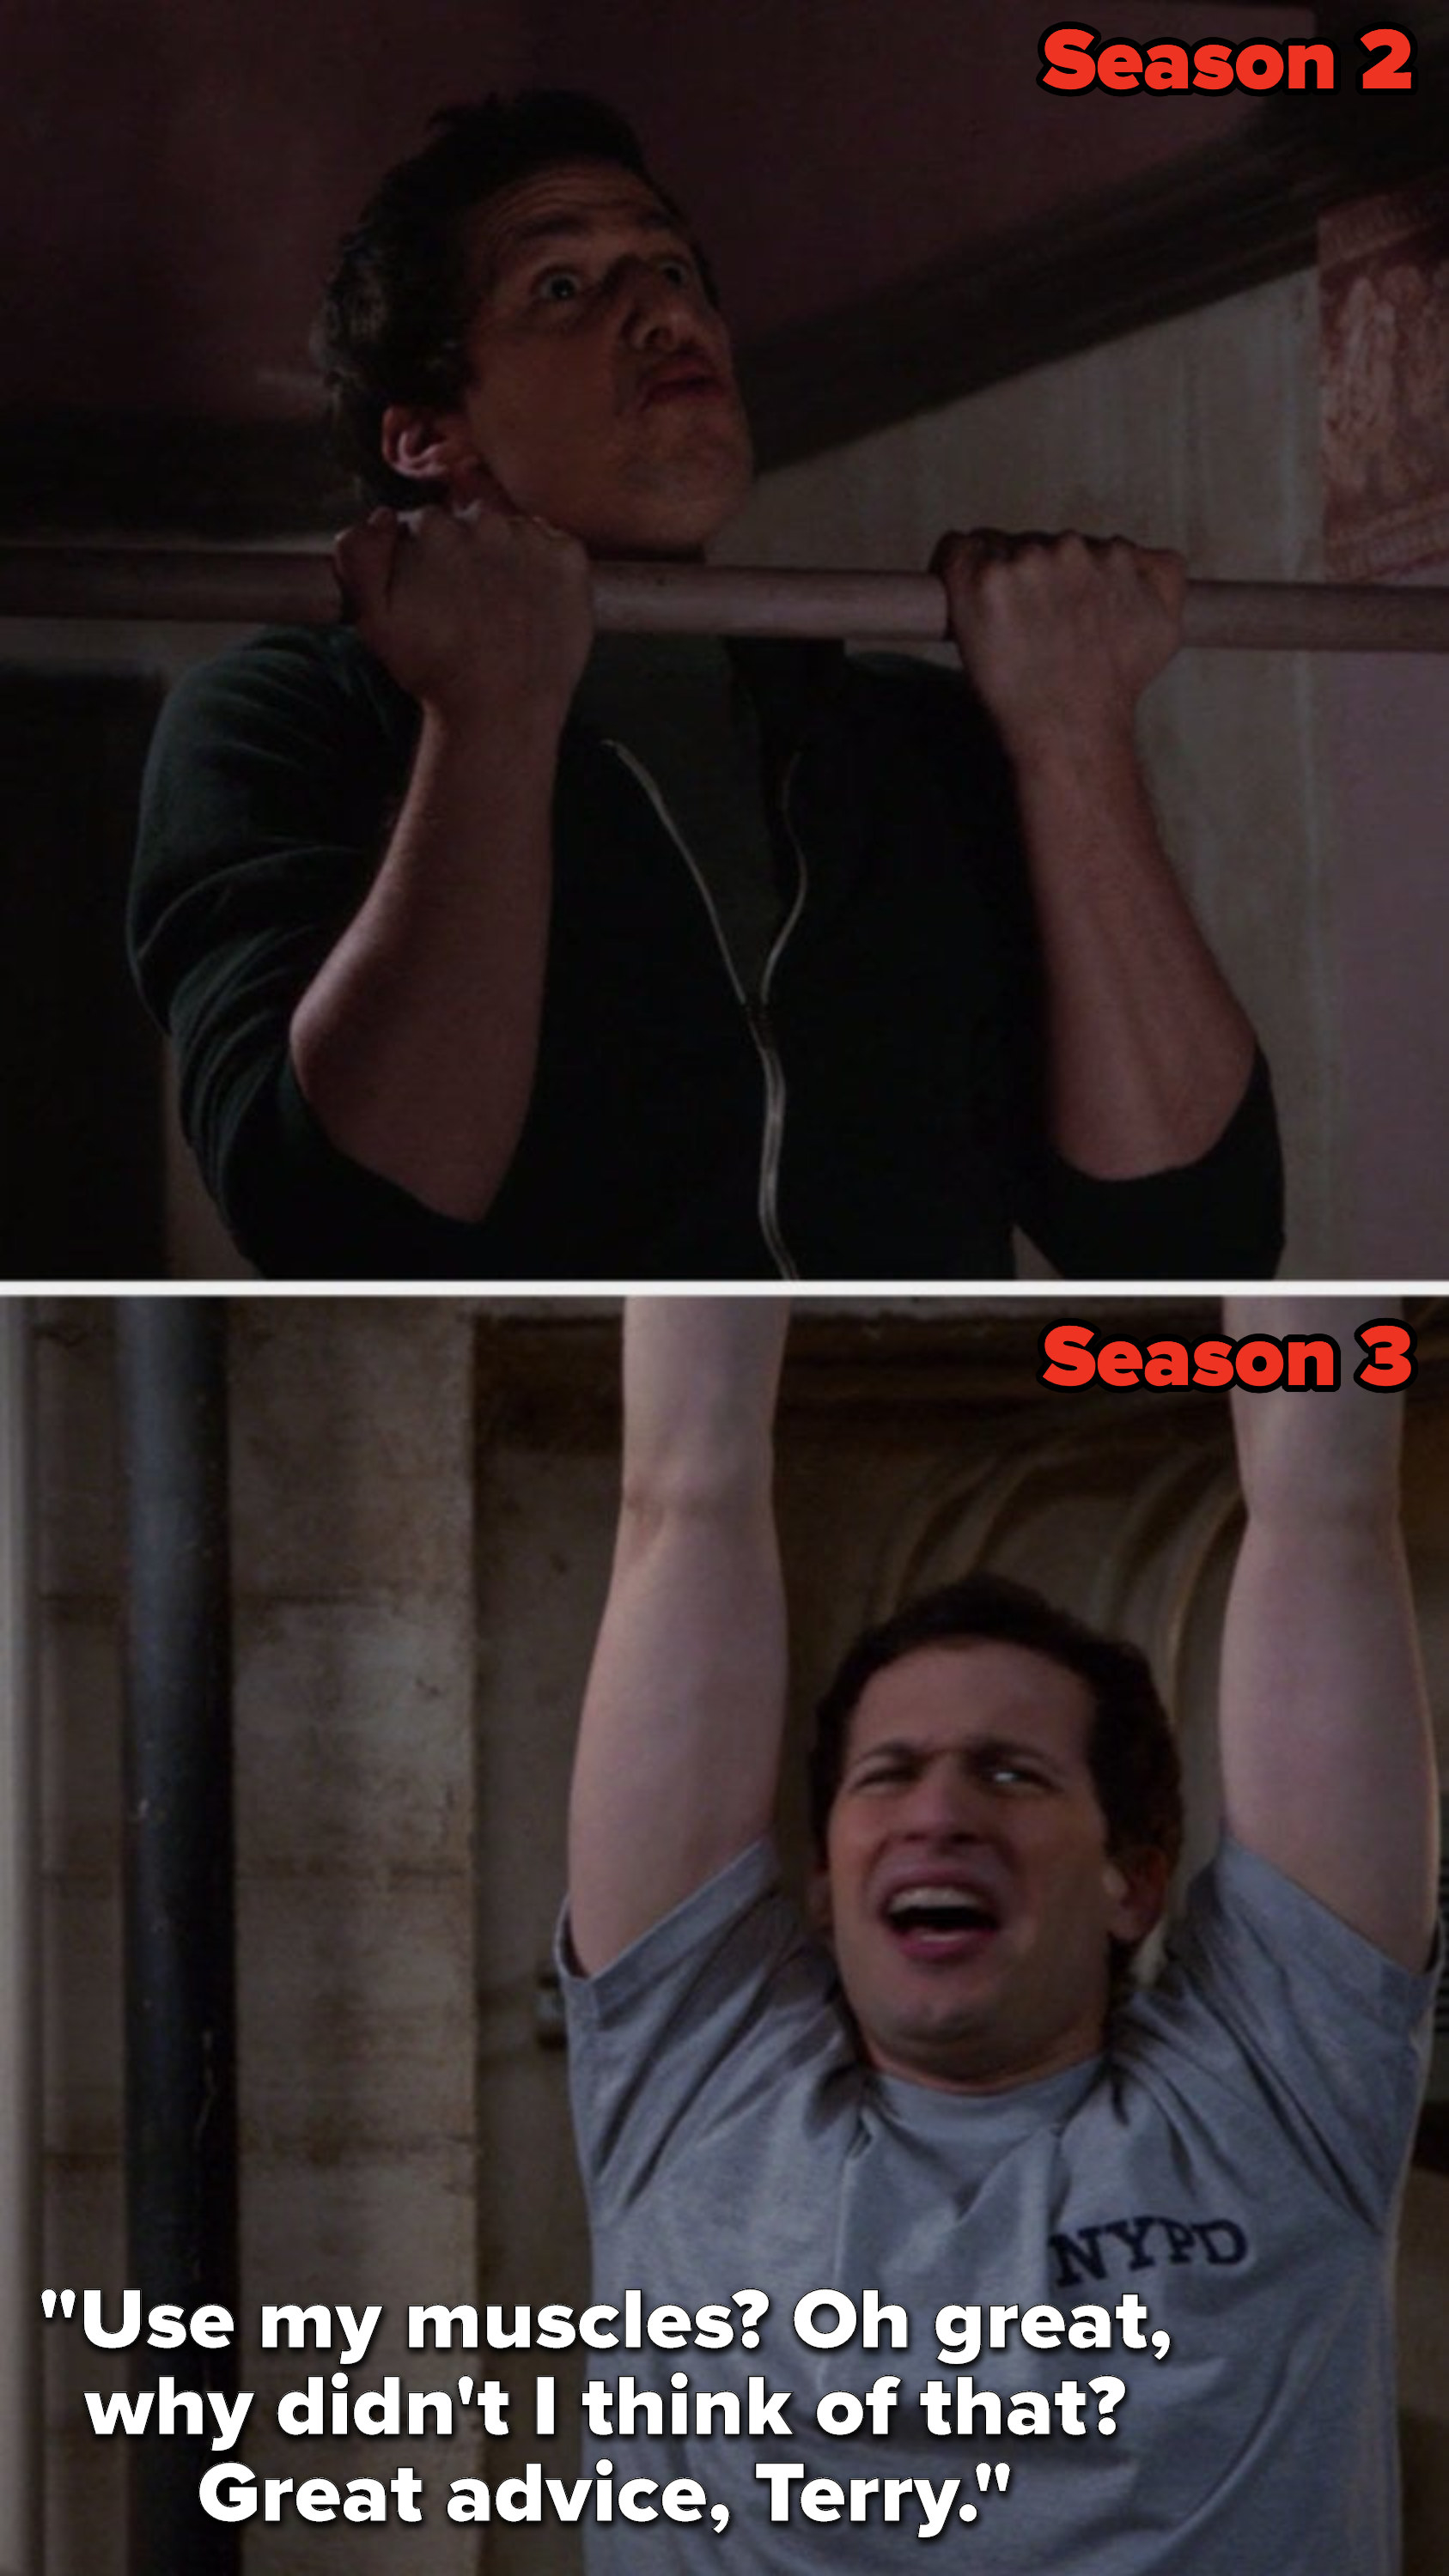 In Season 2, Jake does a pull-up, but in Season 3 he is hanging and says, &quot;Use my muscles, oh great, why didn&#x27;t I think of that, great advice, Terry&quot;